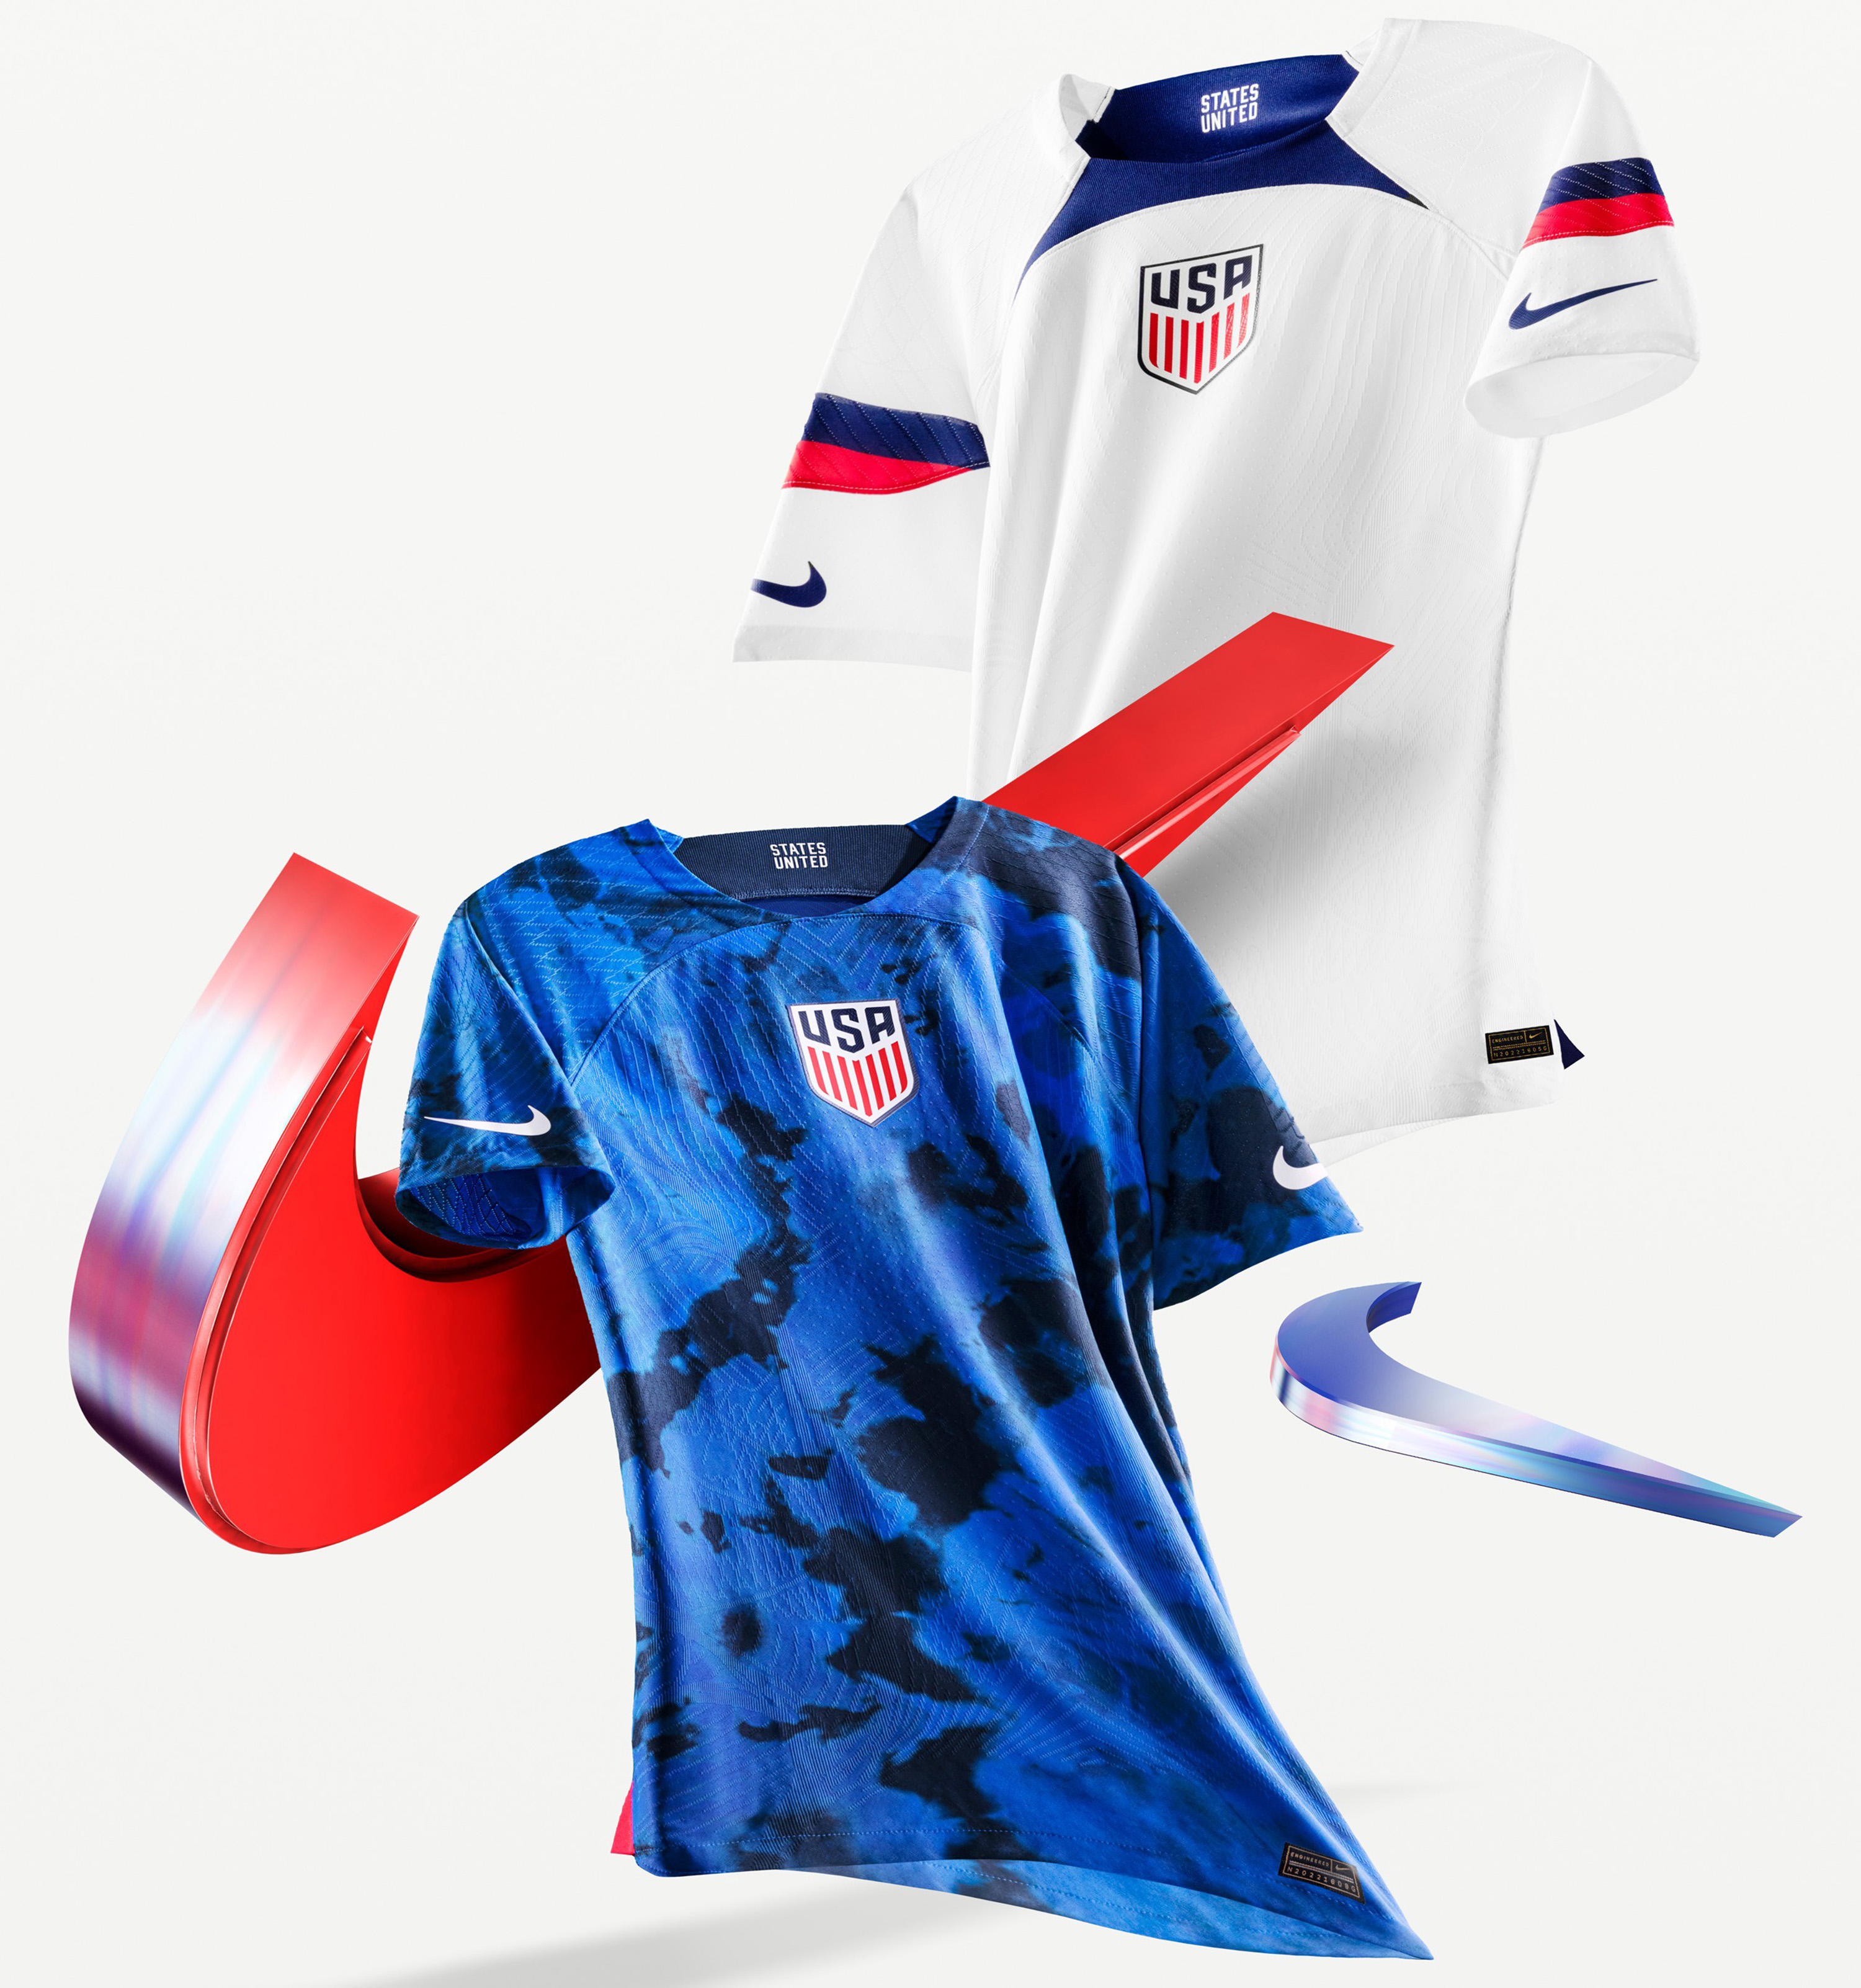 Nike's World Cup kits States, Netherlands miss the mark, but Brazil and Portugal good